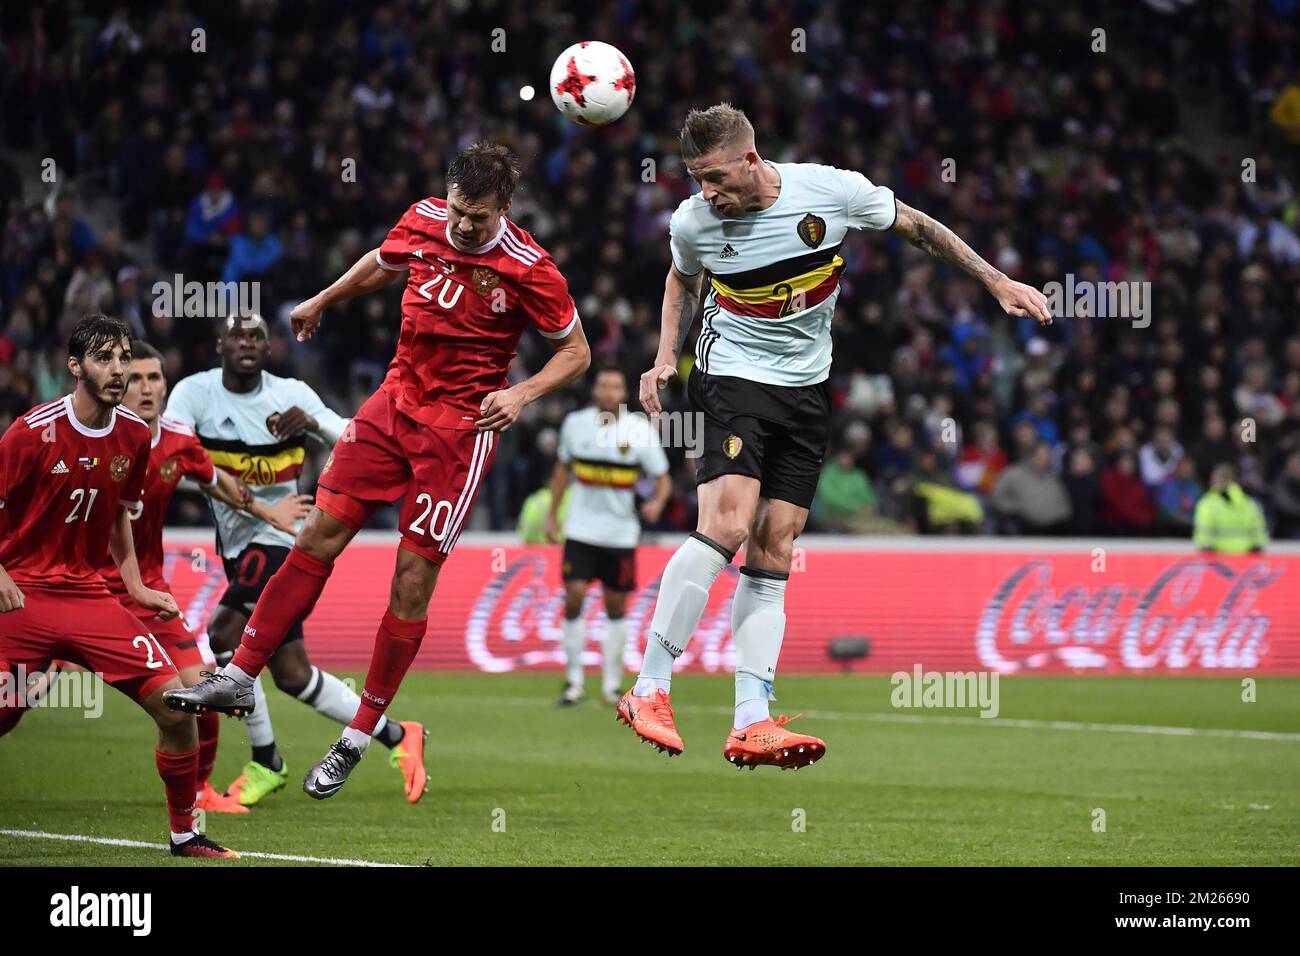 Russia's Maksim Kanunnikov and Belgium's Toby Alderweireld fight for the ball during a friendly game between Belgium's Red Devils and Russia, on Tuesday 28 March 2017, in Adler, Russia. BELGA PHOTO DIRK WAEM Stock Photo